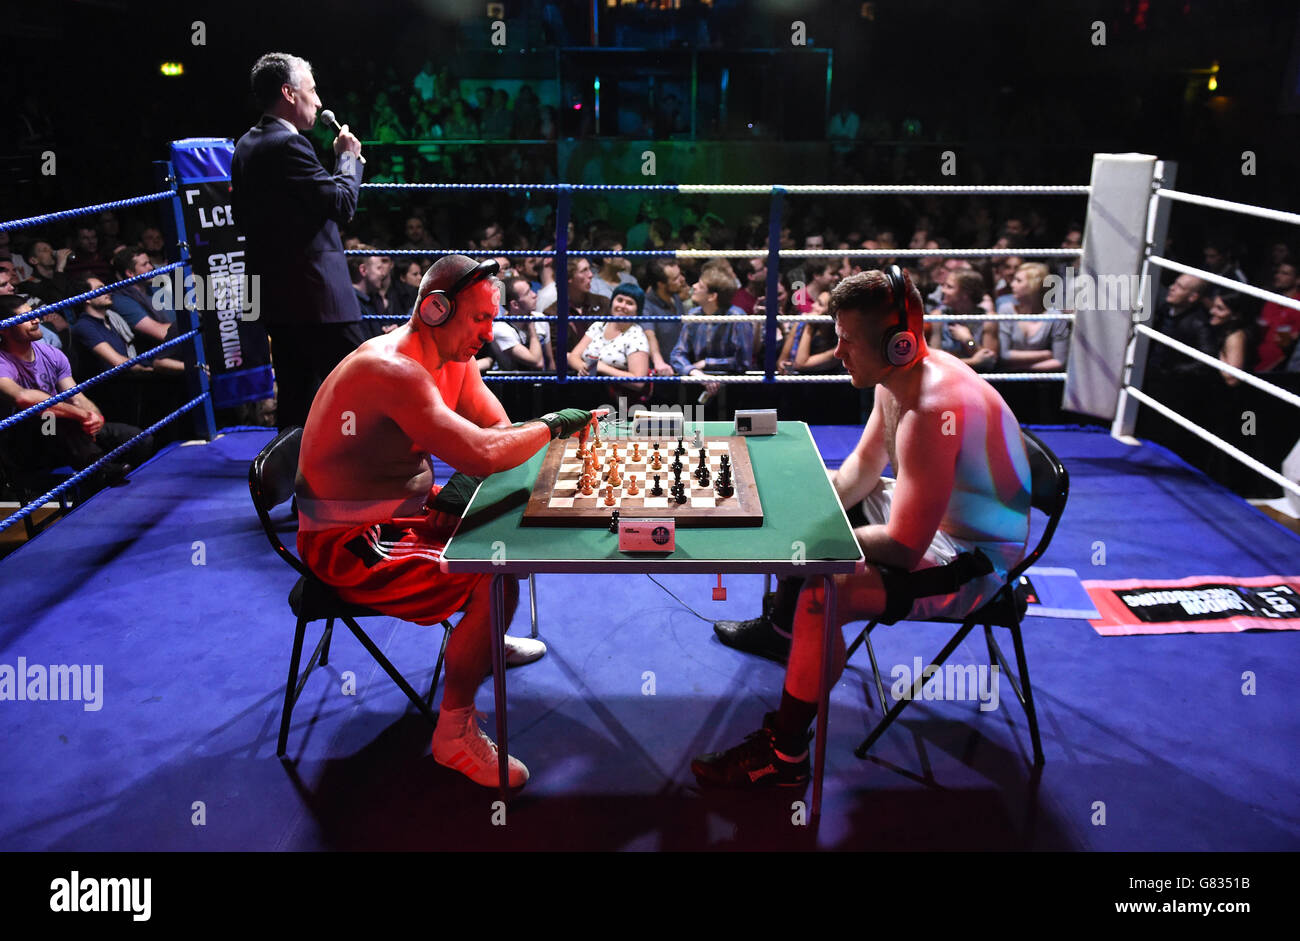 File:Chess Boxing 2007 (combined).jpg - Wikimedia Commons